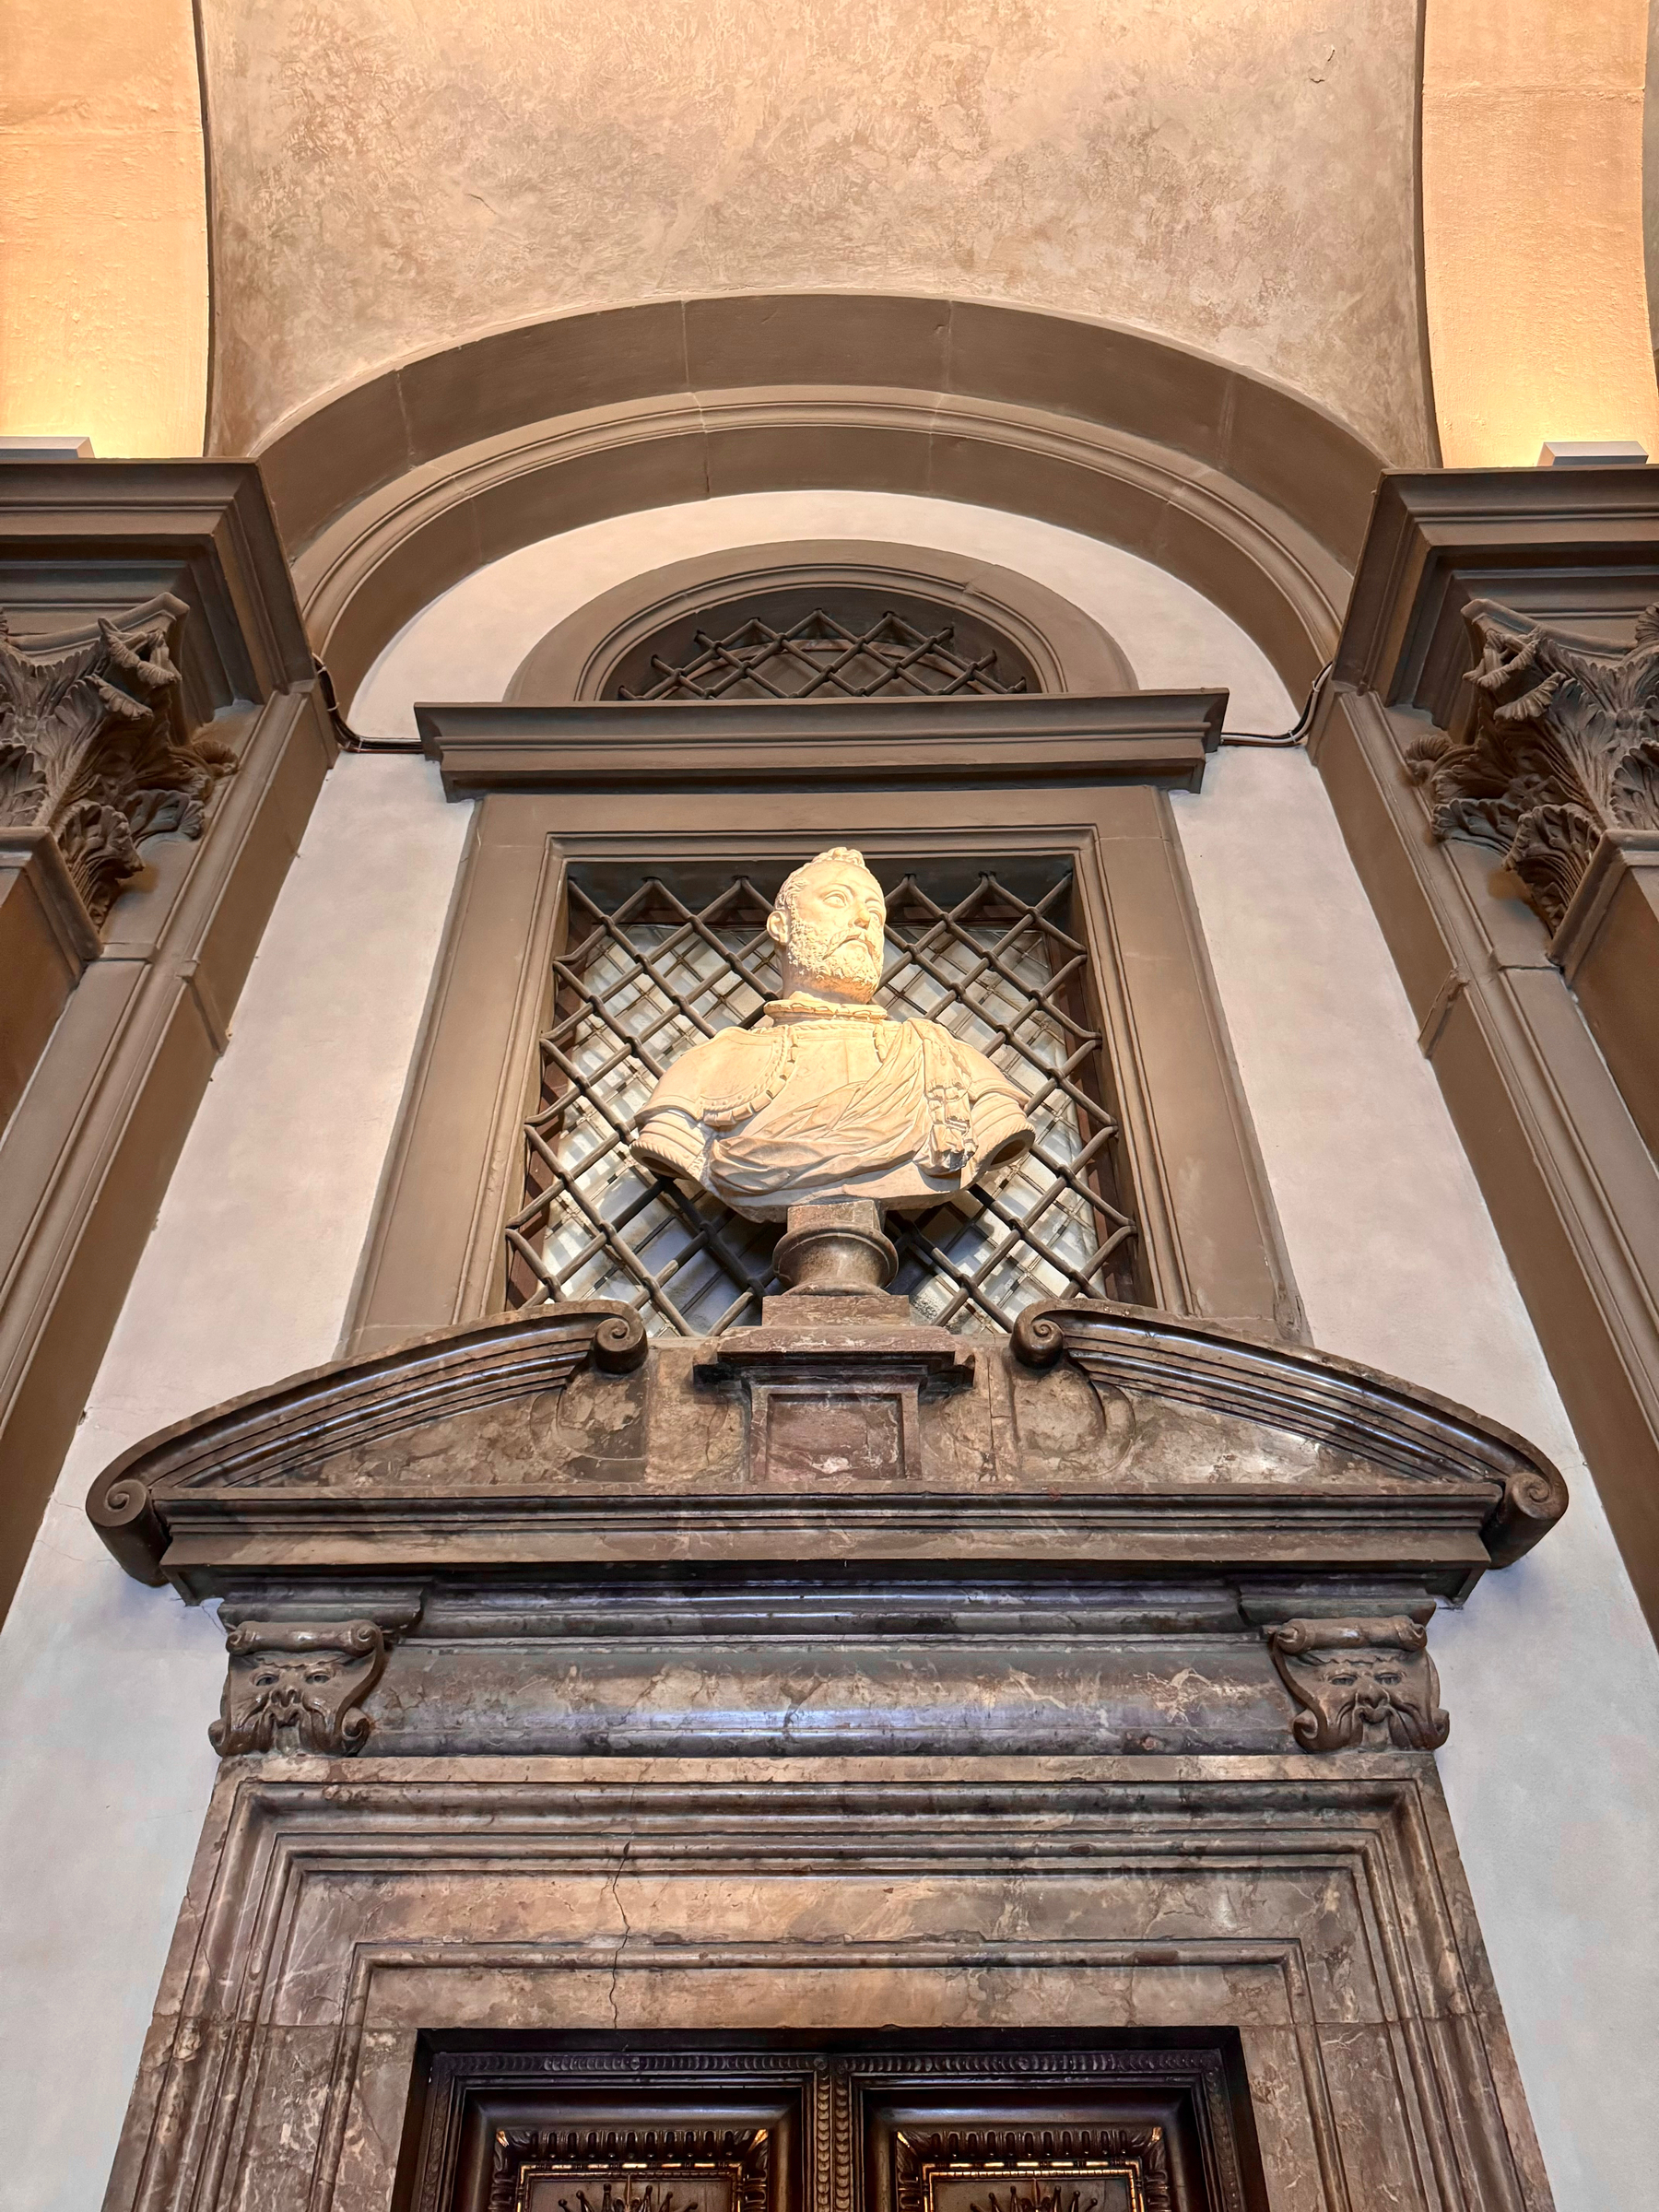 A marble bust of a bearded man in historical attire is placed on a pedestal above an ornately carved wooden doorway. The bust and the door frame are set within an arched architectural niche. The niche has decorative elements including a latticed window. 